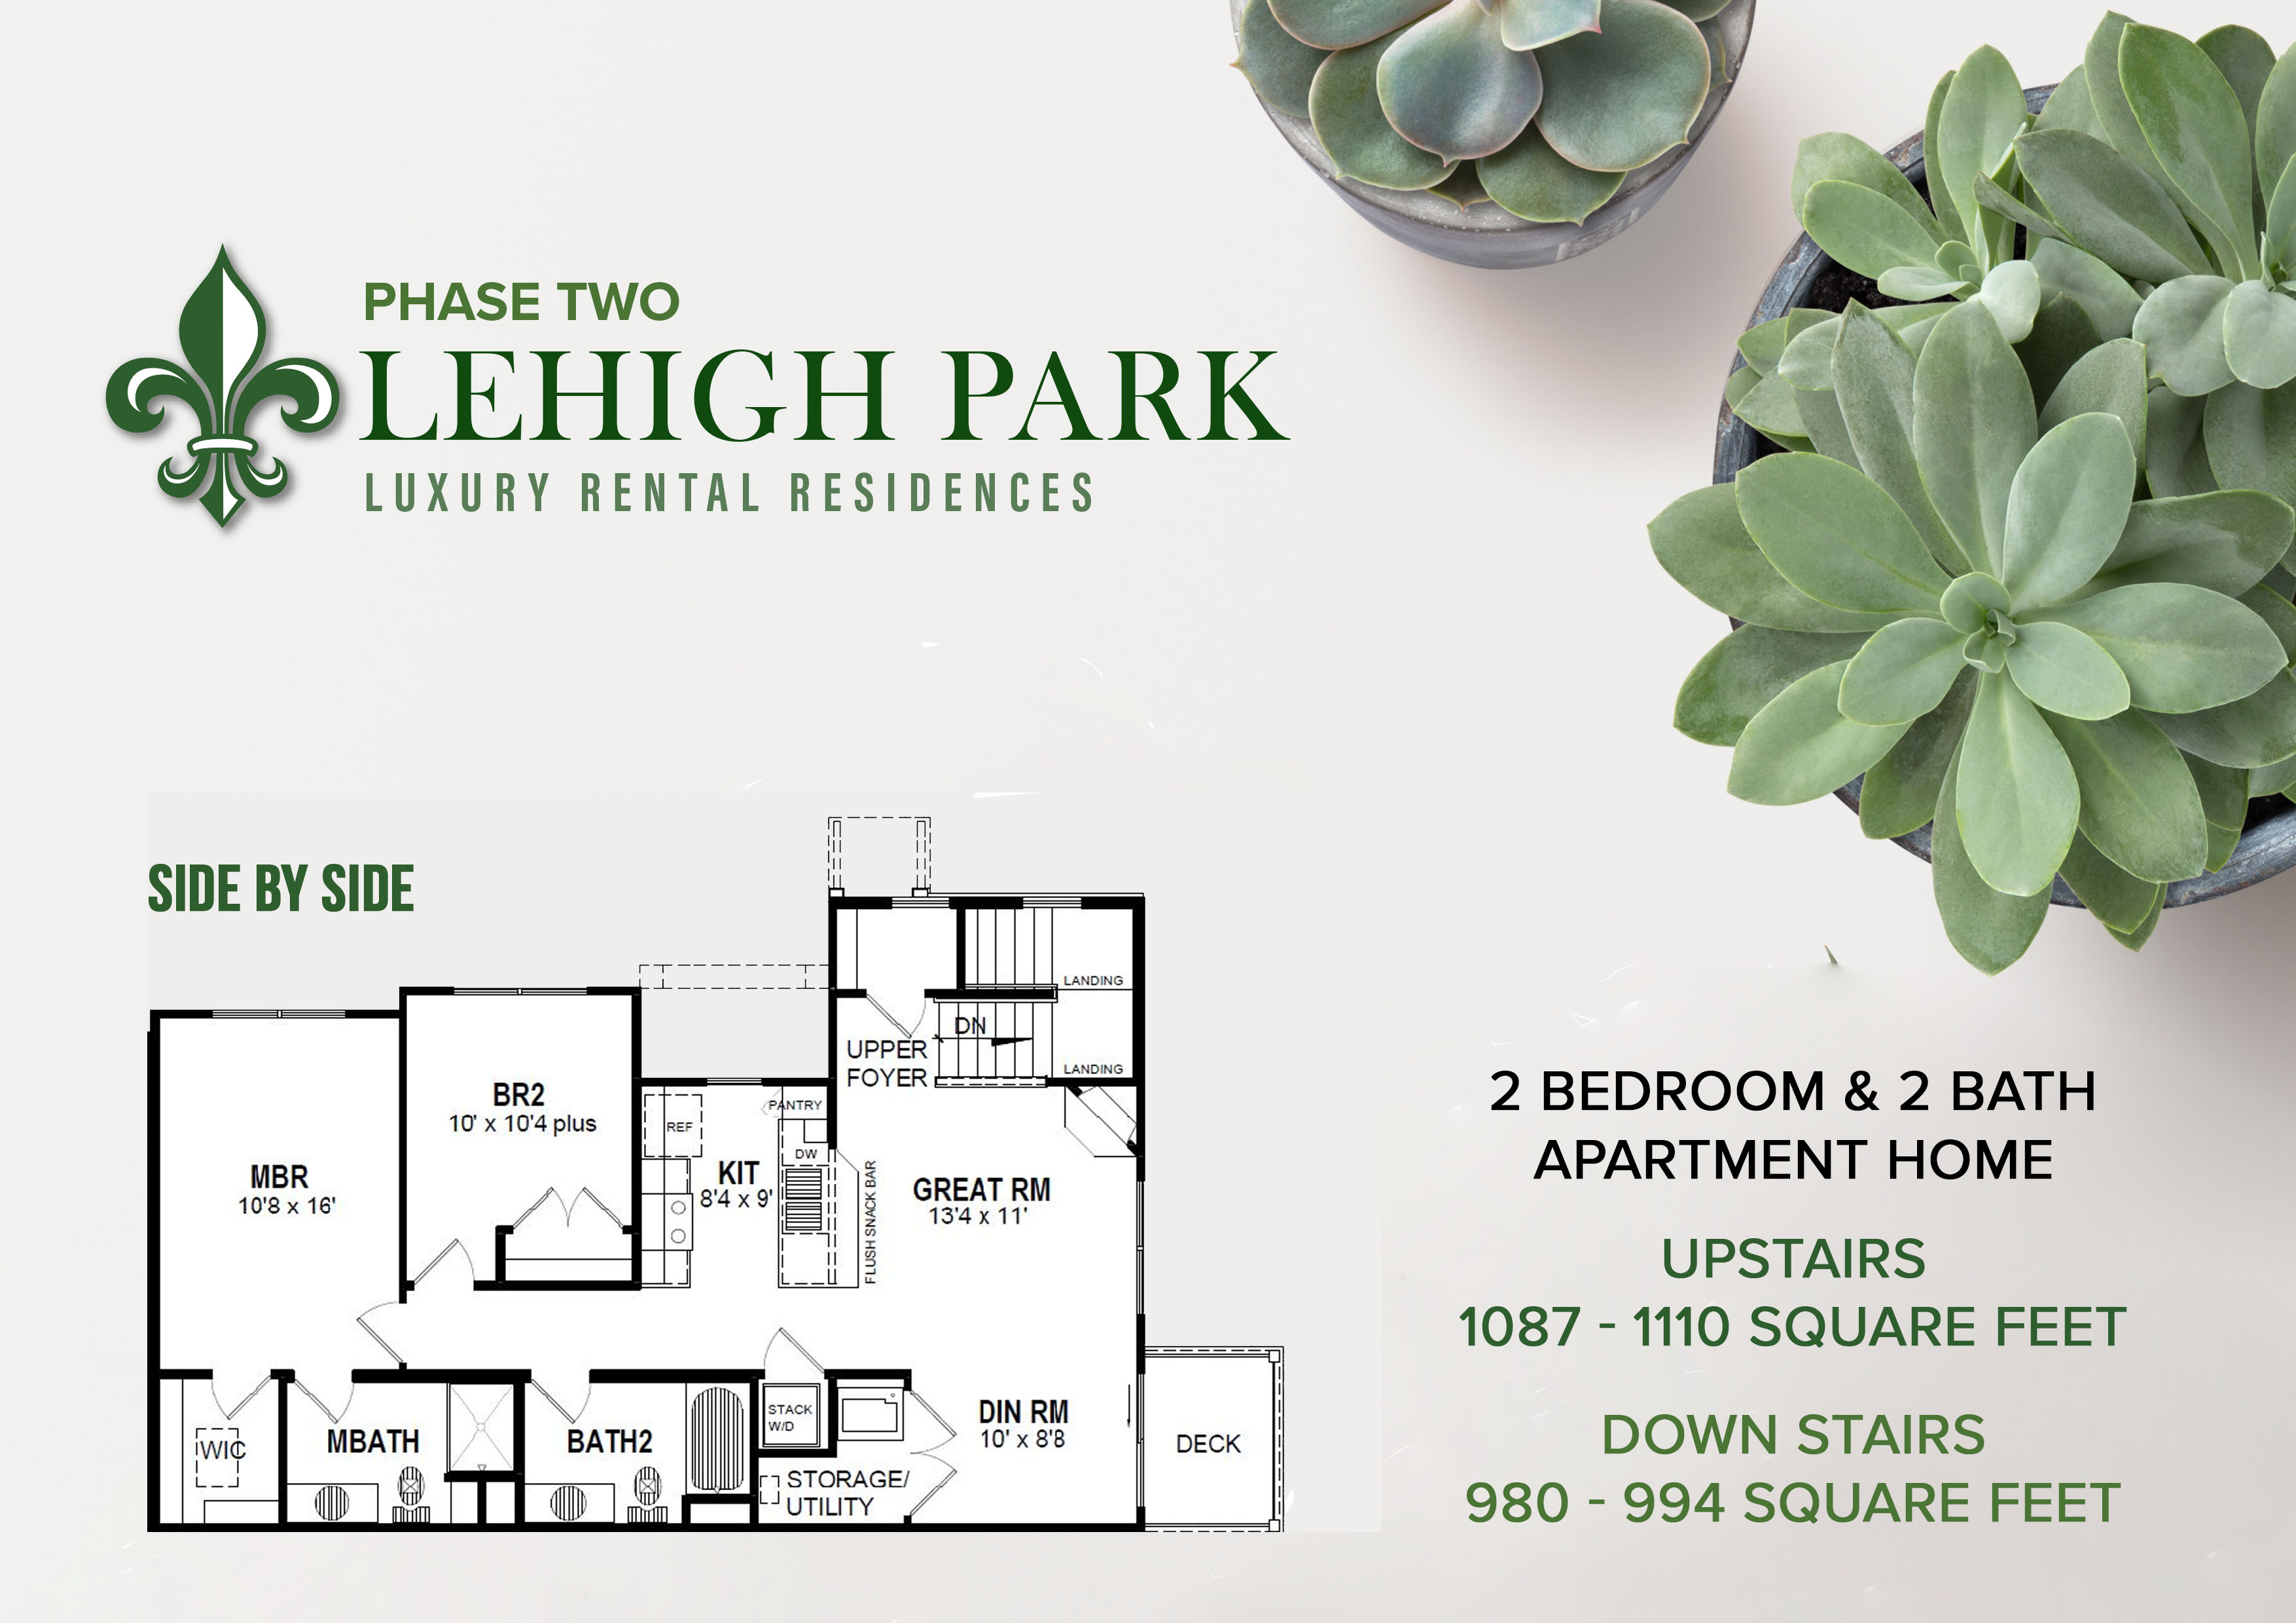 Lehigh Park Luxury Apartments - Floorplan - (Phase Two) 2 Bedroom & 2 Bath Apartment Home (Side By Side)